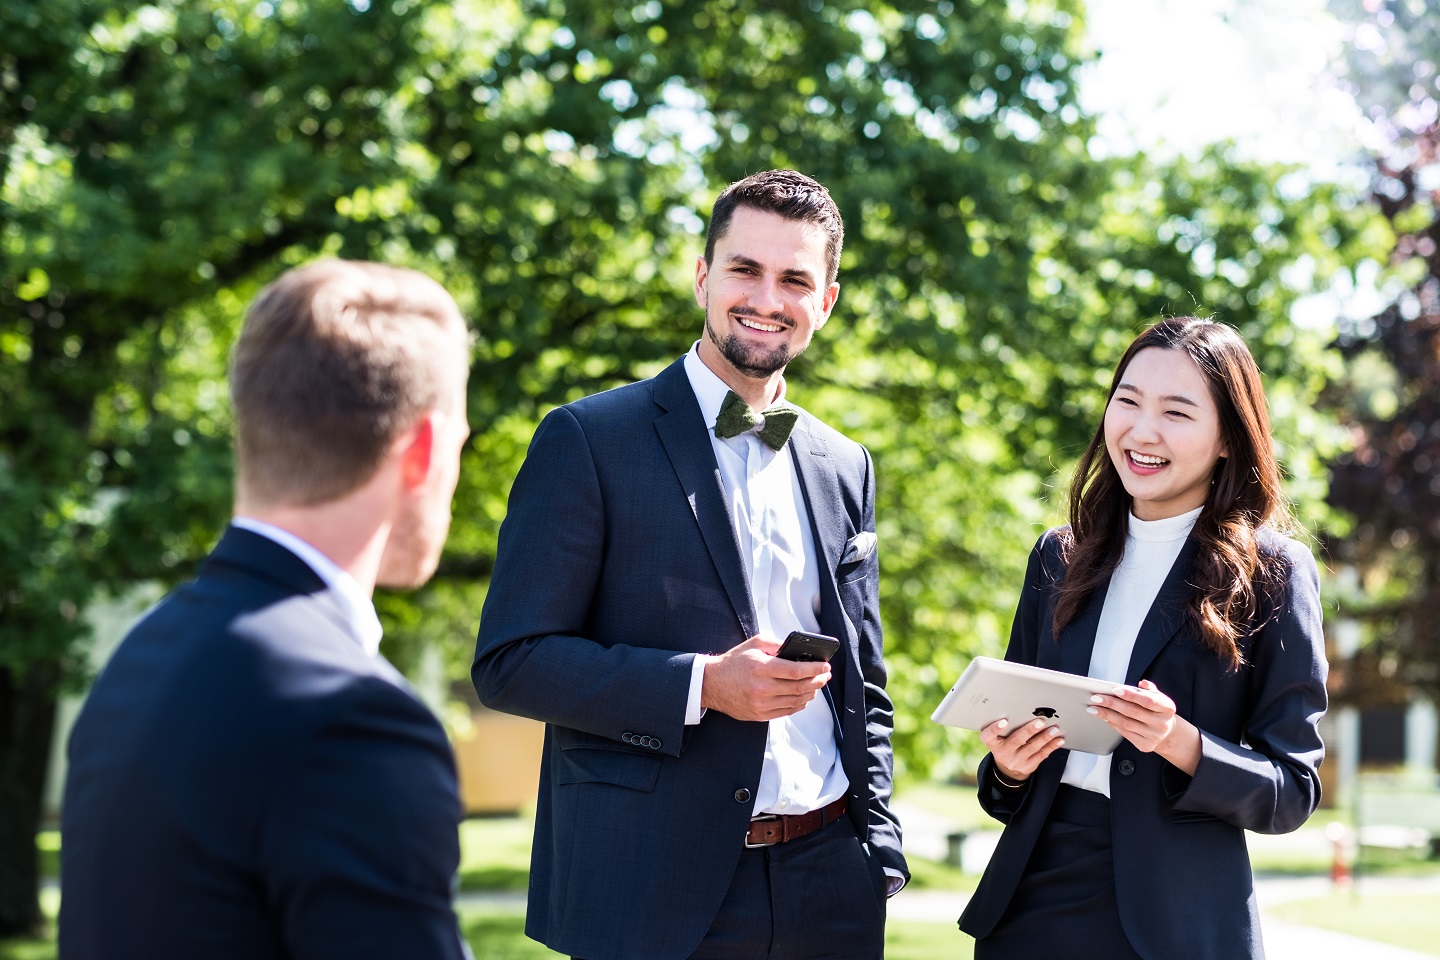 EHL's MBA in hospitality: A flexible management program